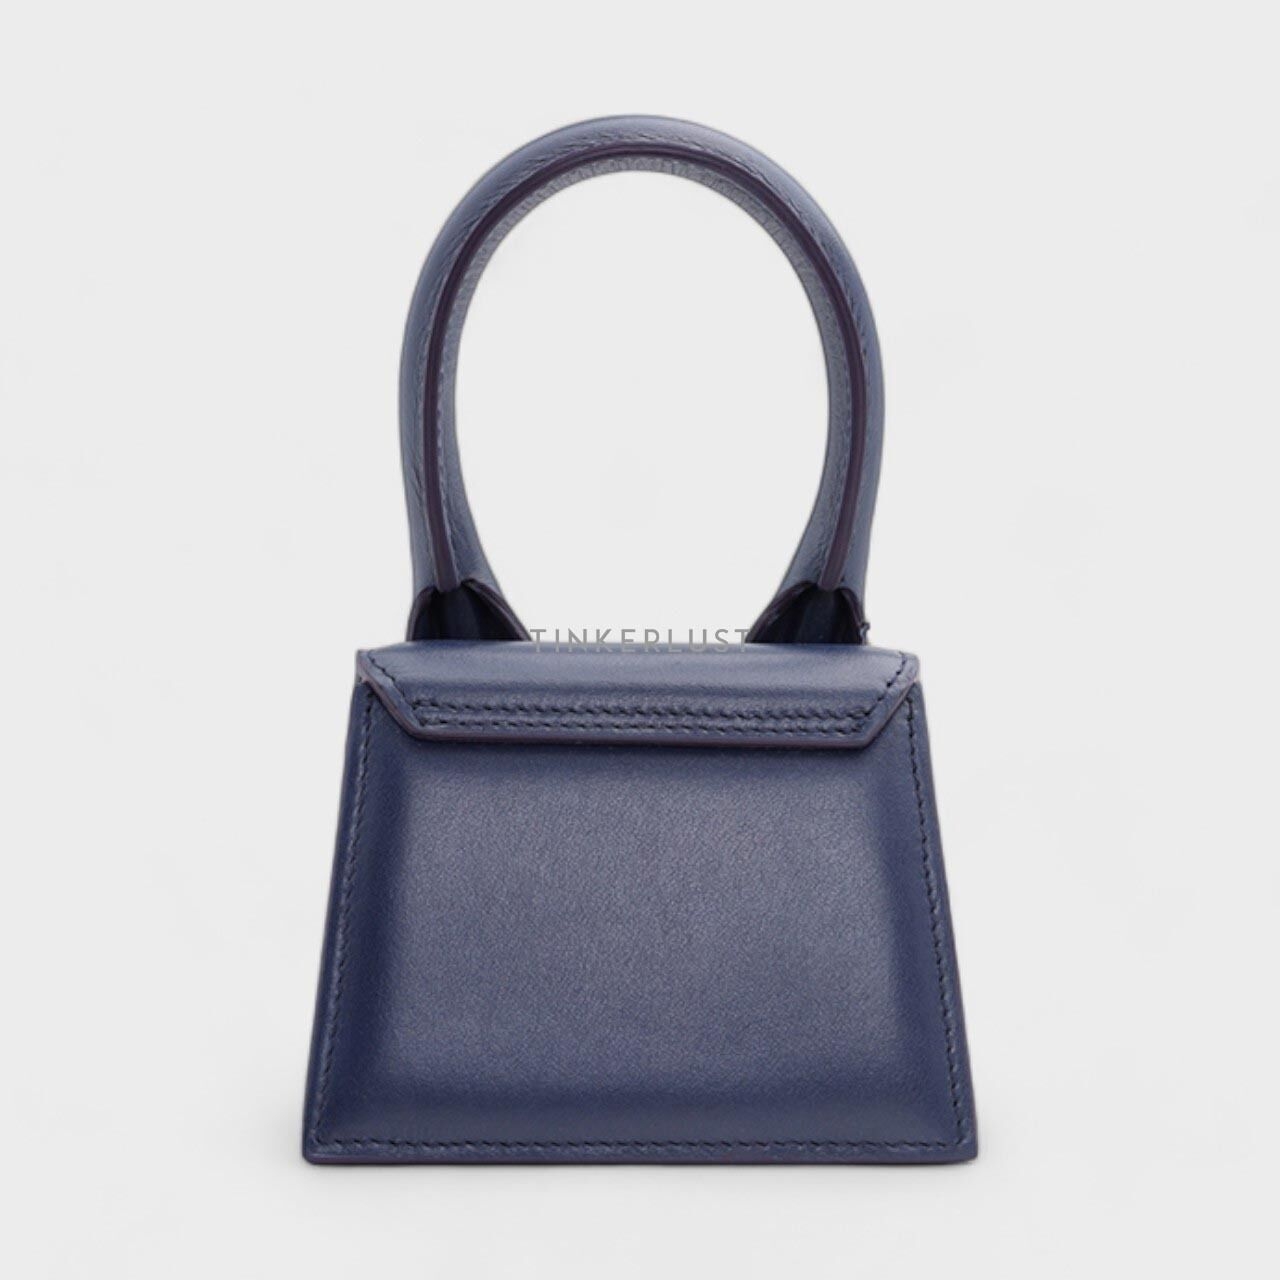 Jacquemus Le Chiquito Homme in Navy with Cotton Strap Shoulder Bag